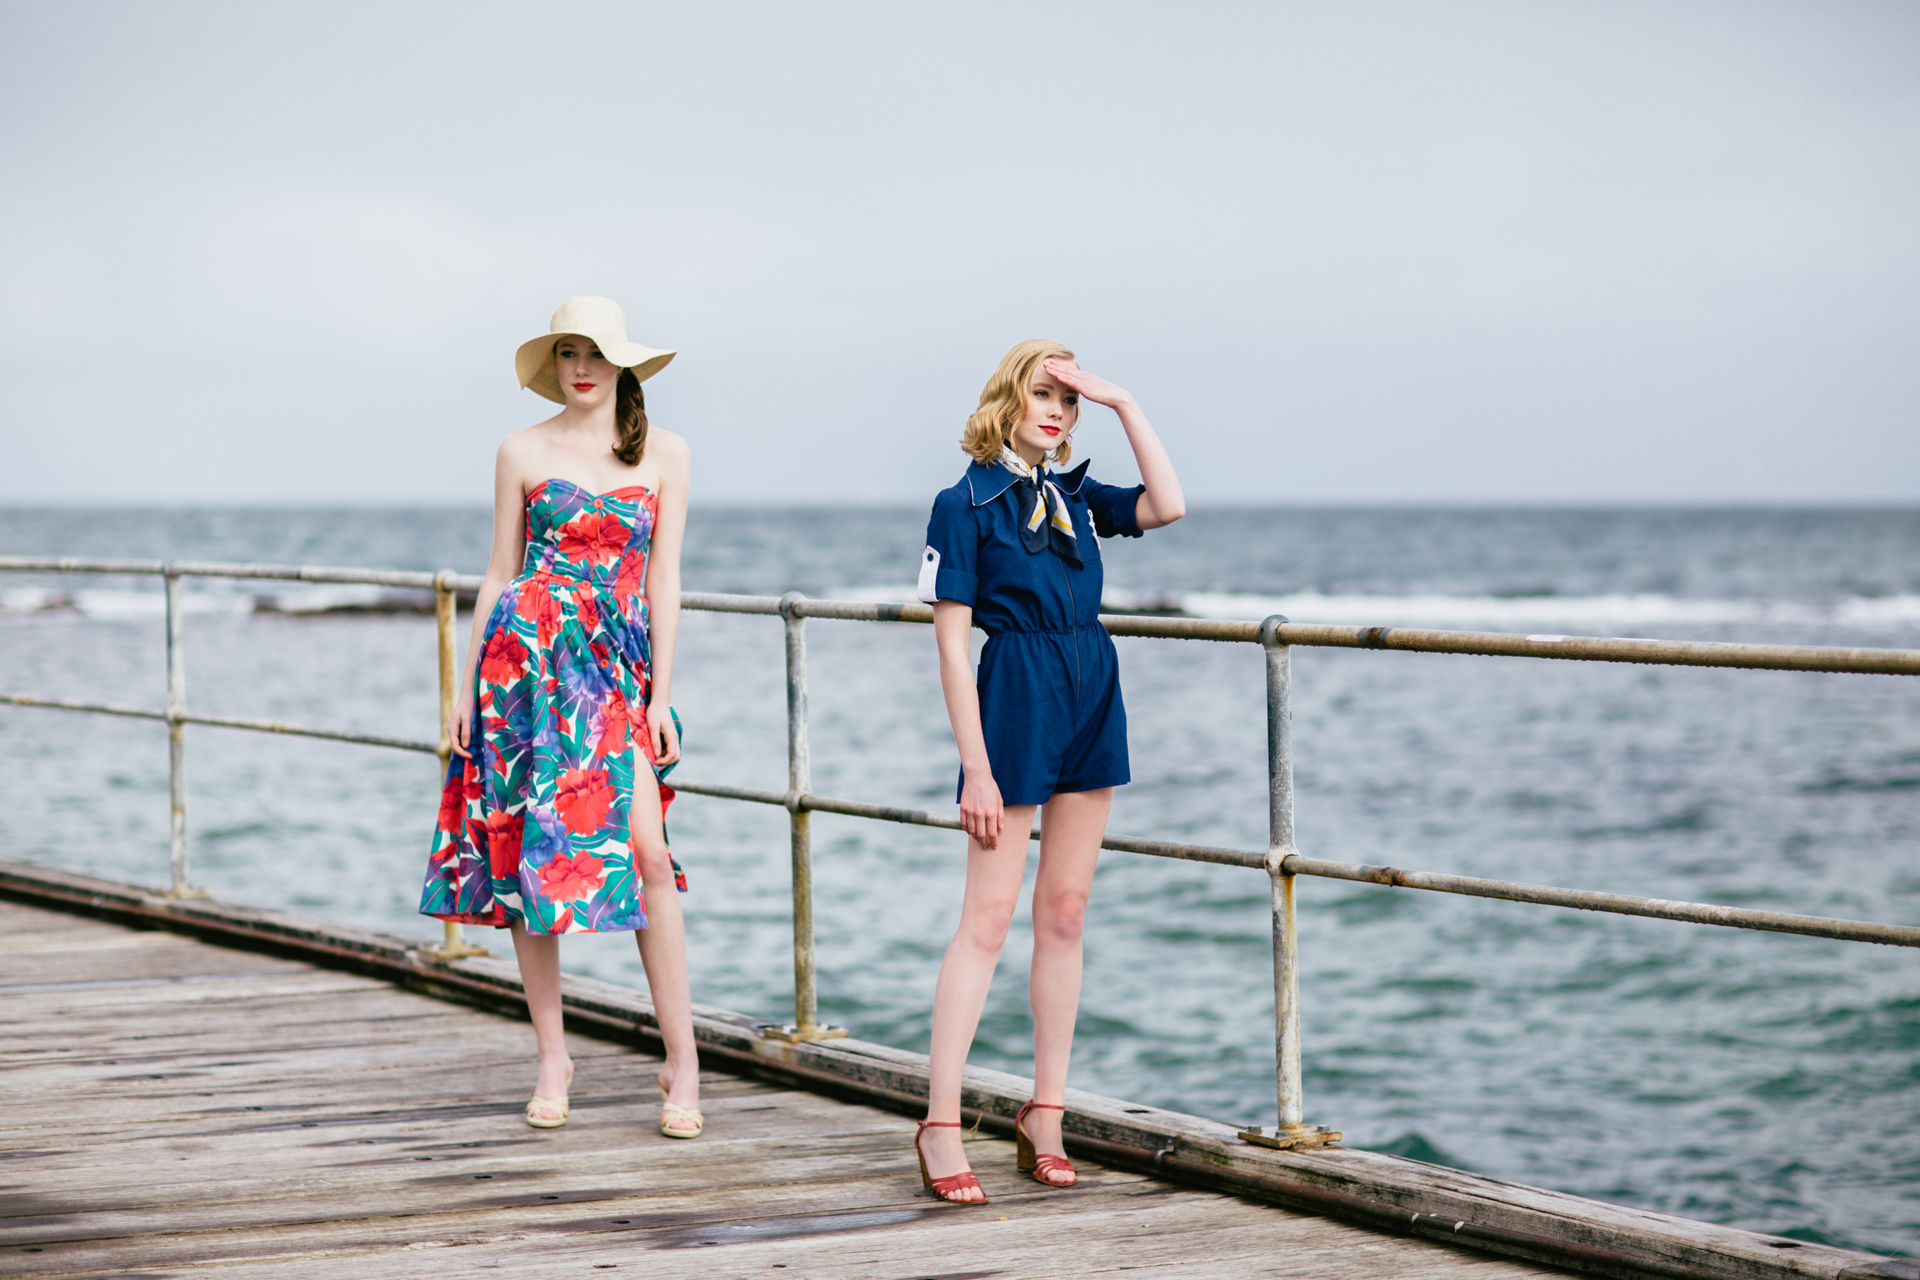 Summer Campaign Photography in Melbourne - Summer Fashion Shoot